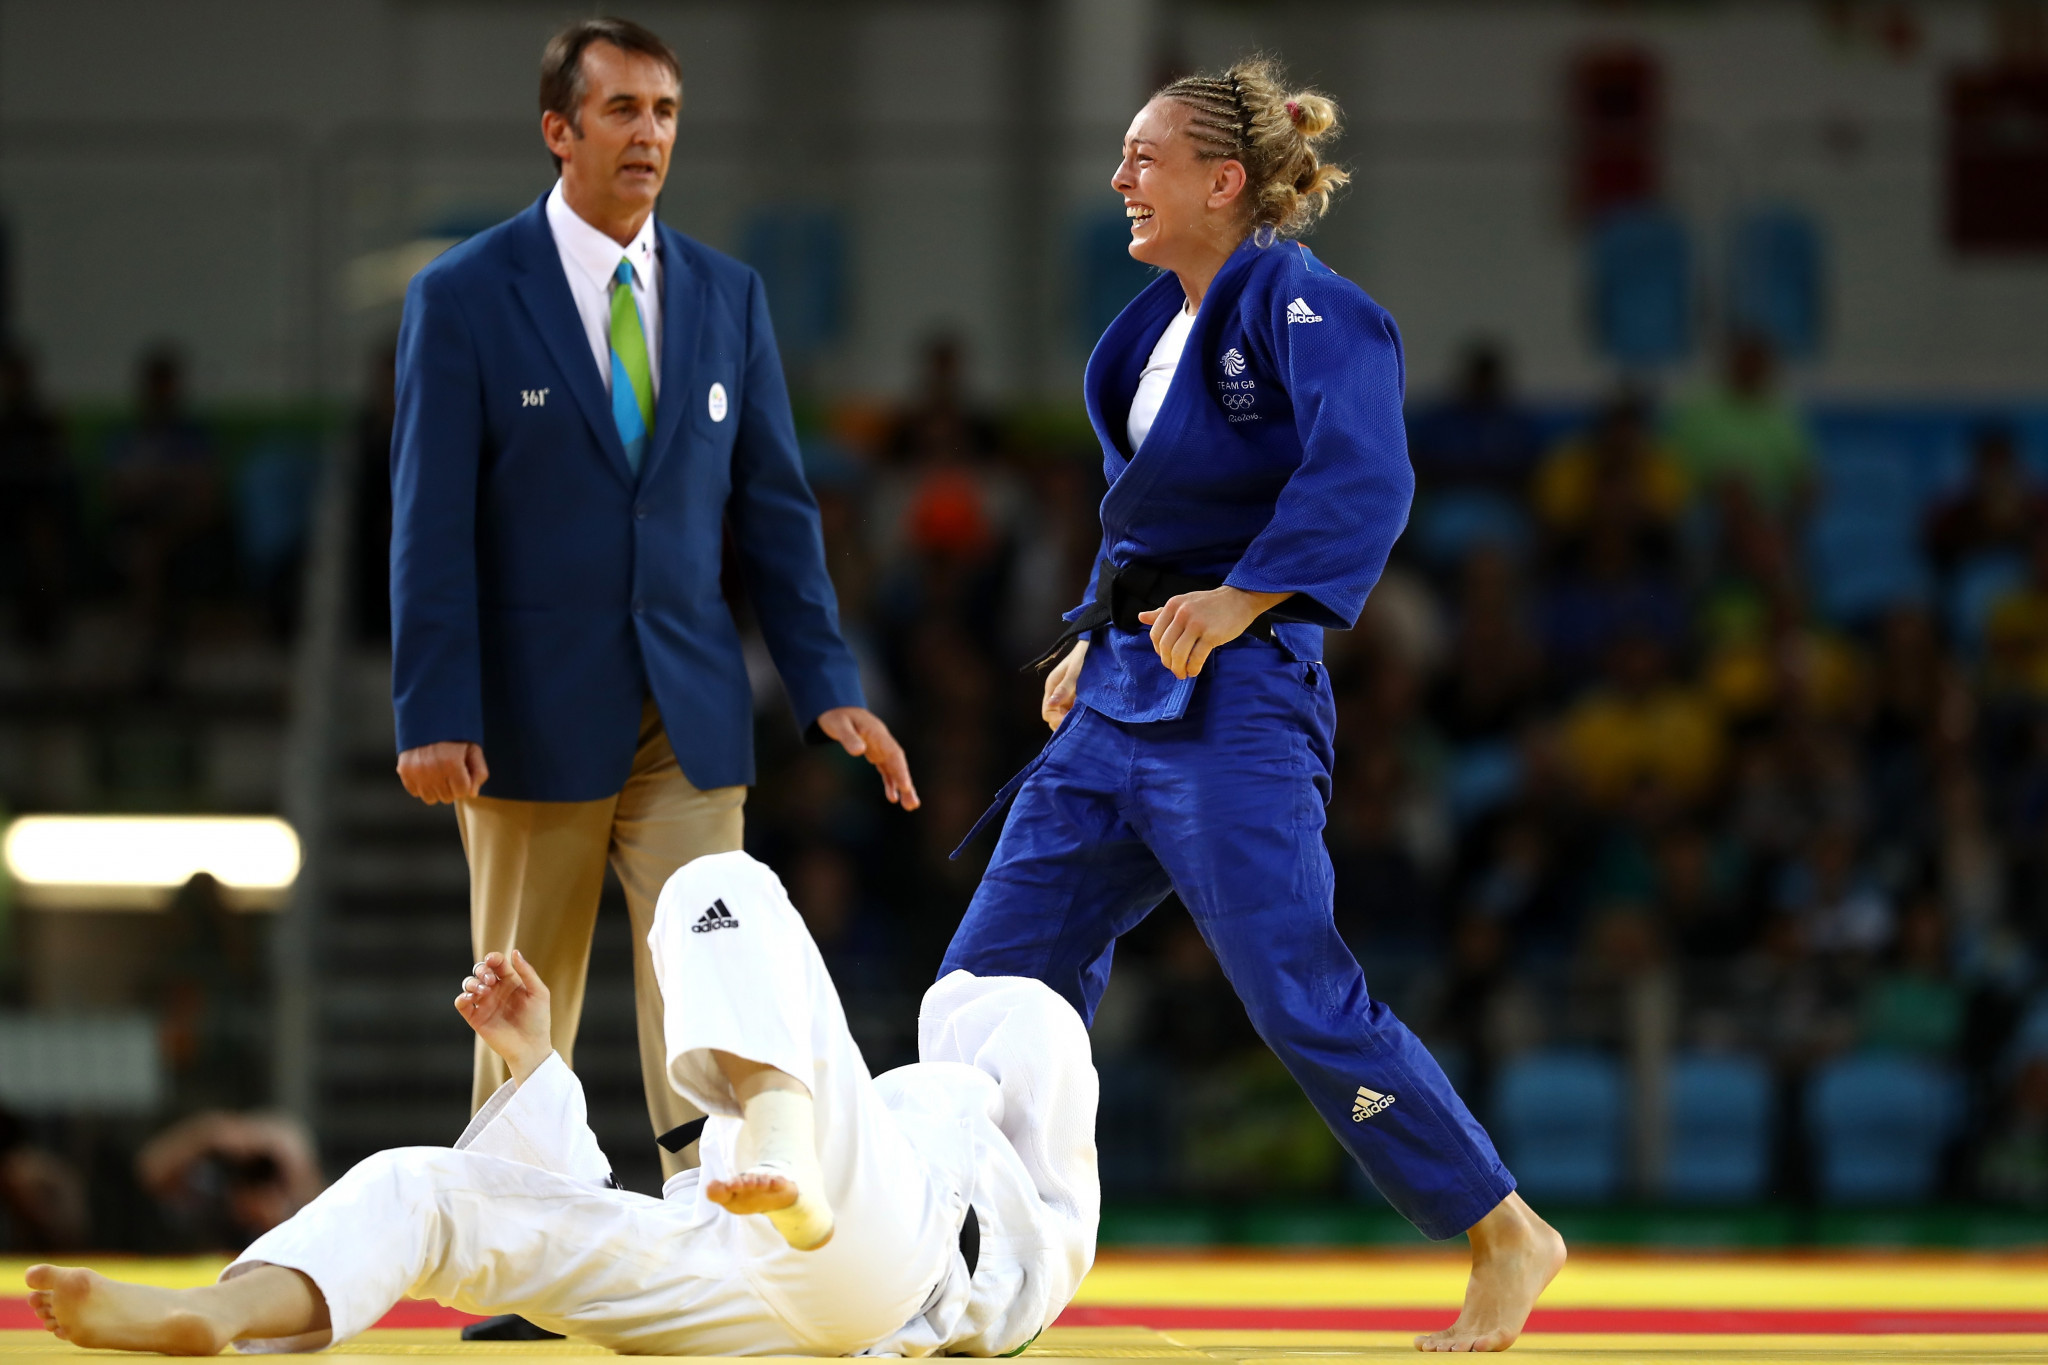 Sally Conway, who captured bronze at the Rio 2016 Olympics, retired from judo in February last year ©Getty Images